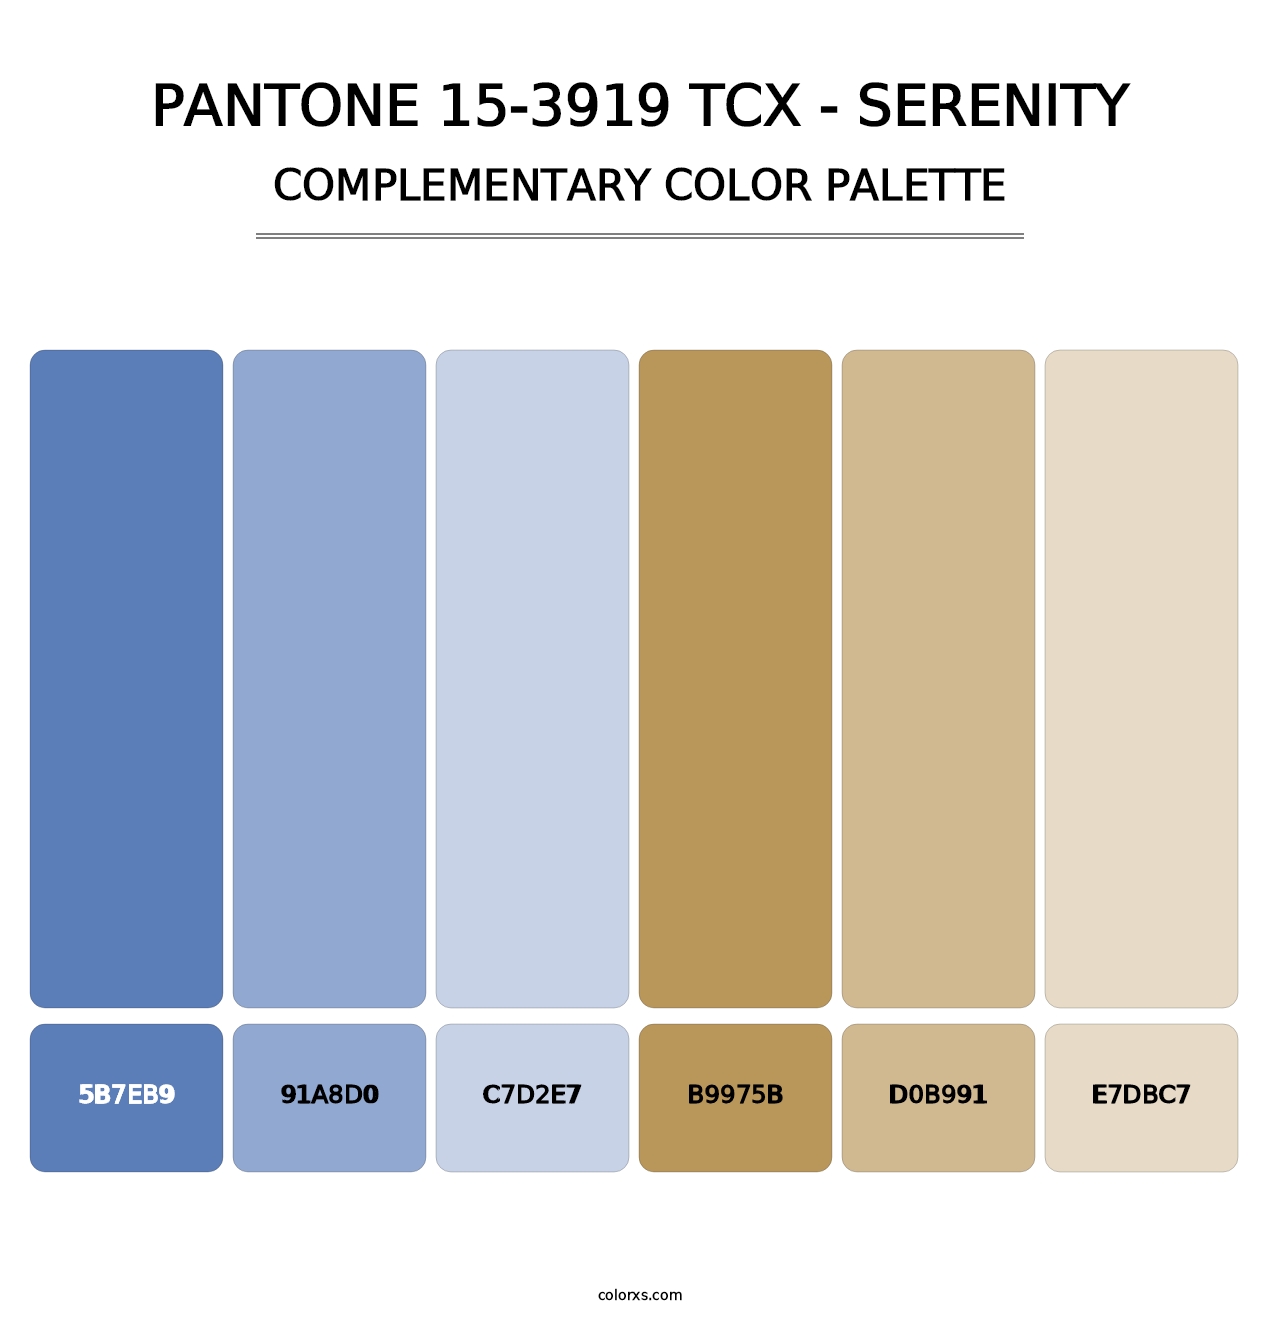 PANTONE 15-3919 TCX - Serenity - Complementary Color Palette